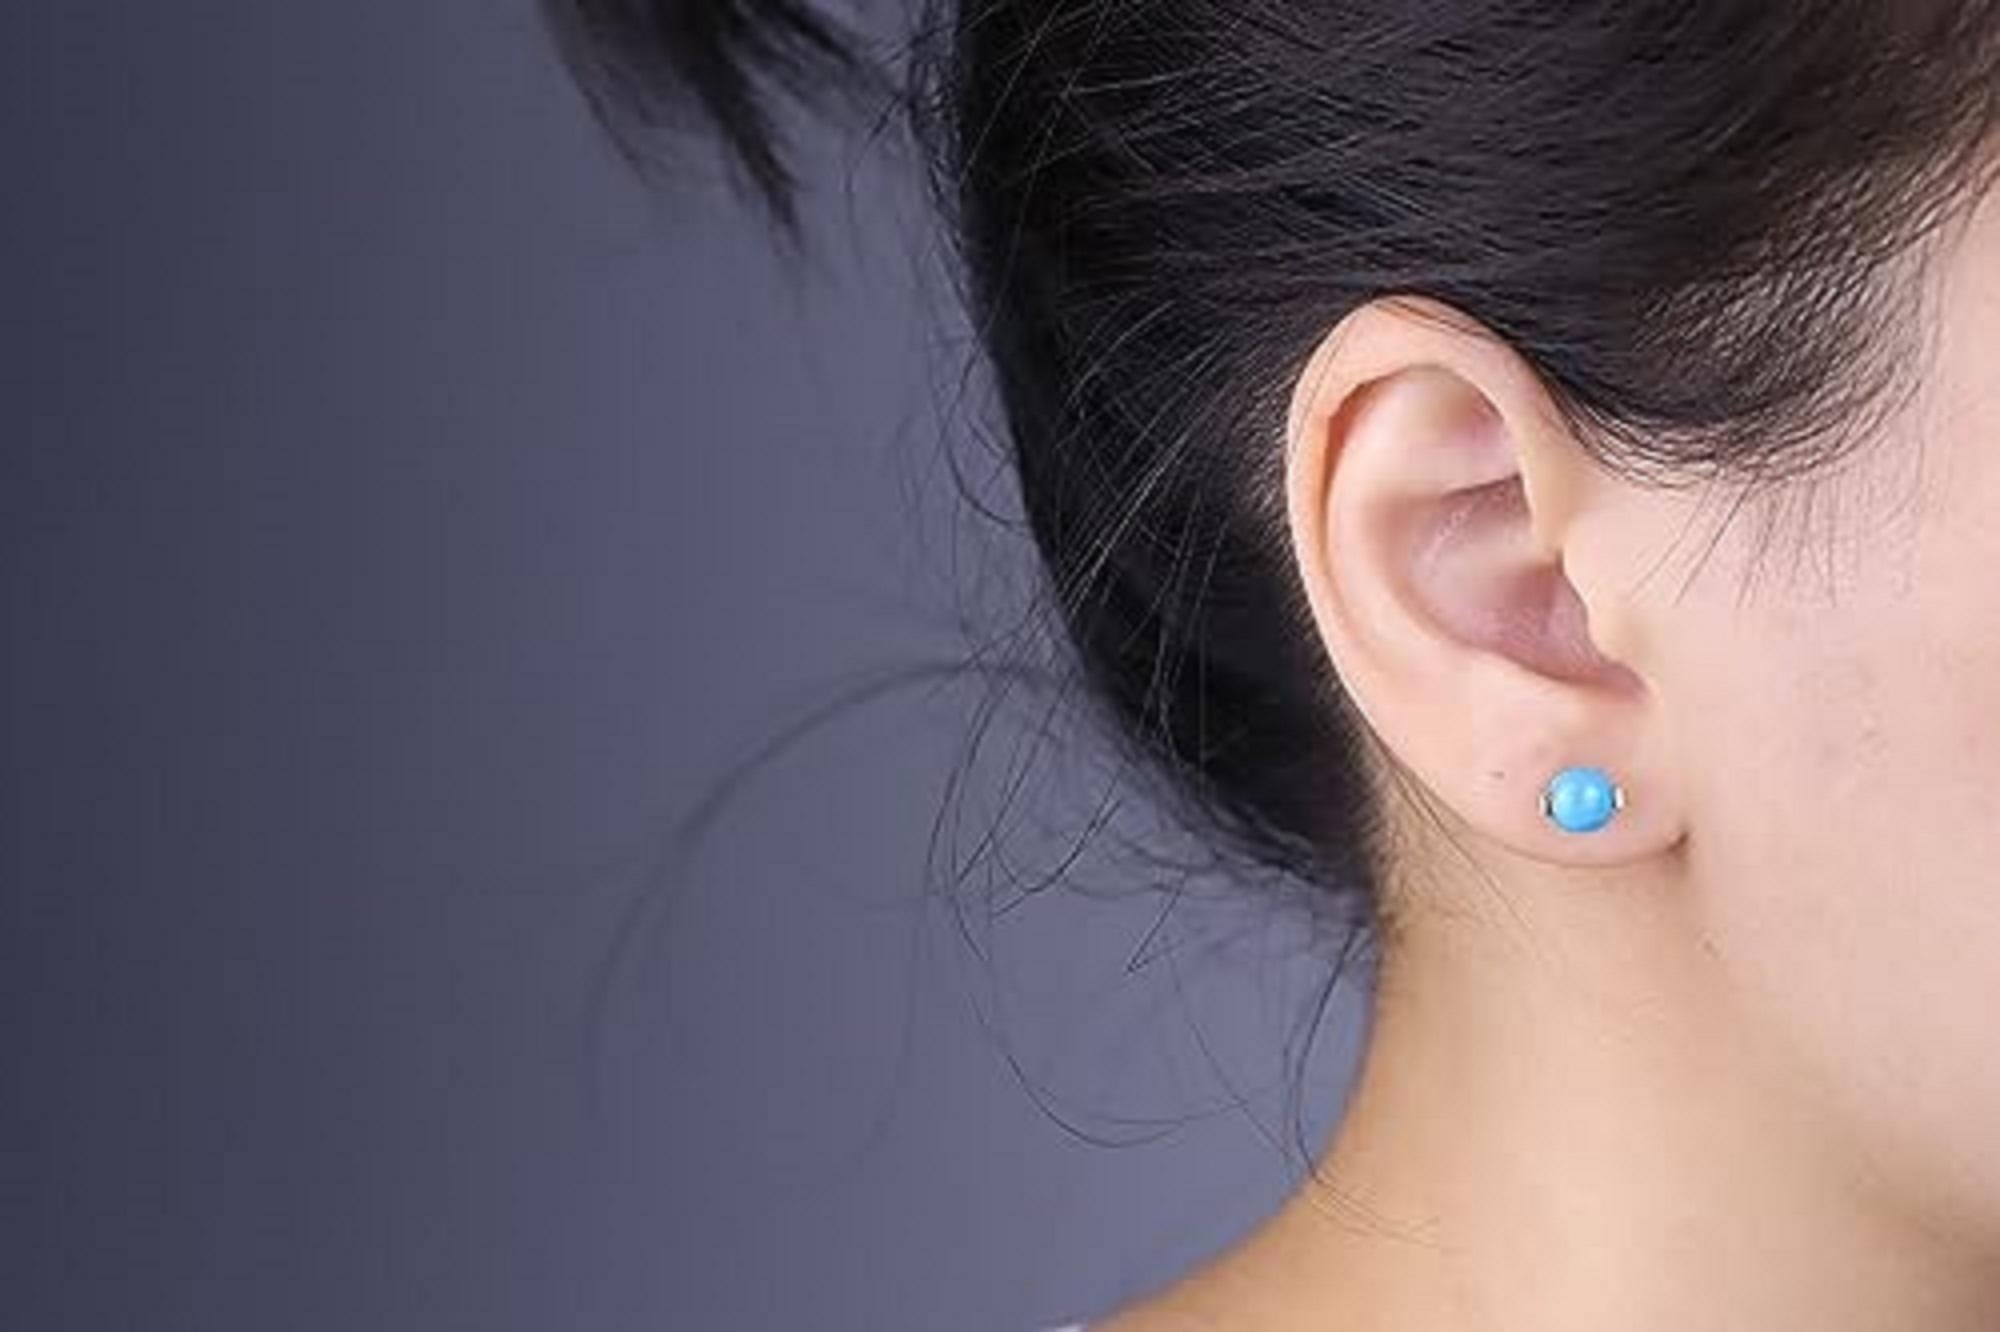 Decorate yourself in elegance with this Earring is crafted from 10-karat Yellow Gold by Gin & Grace. This Earring is made up of 6.0 mm Round-cut Turquoise (2 Pcs) 1.67 carat. This Earring is weight 1.08 grams. This delicate Earring is polished to a